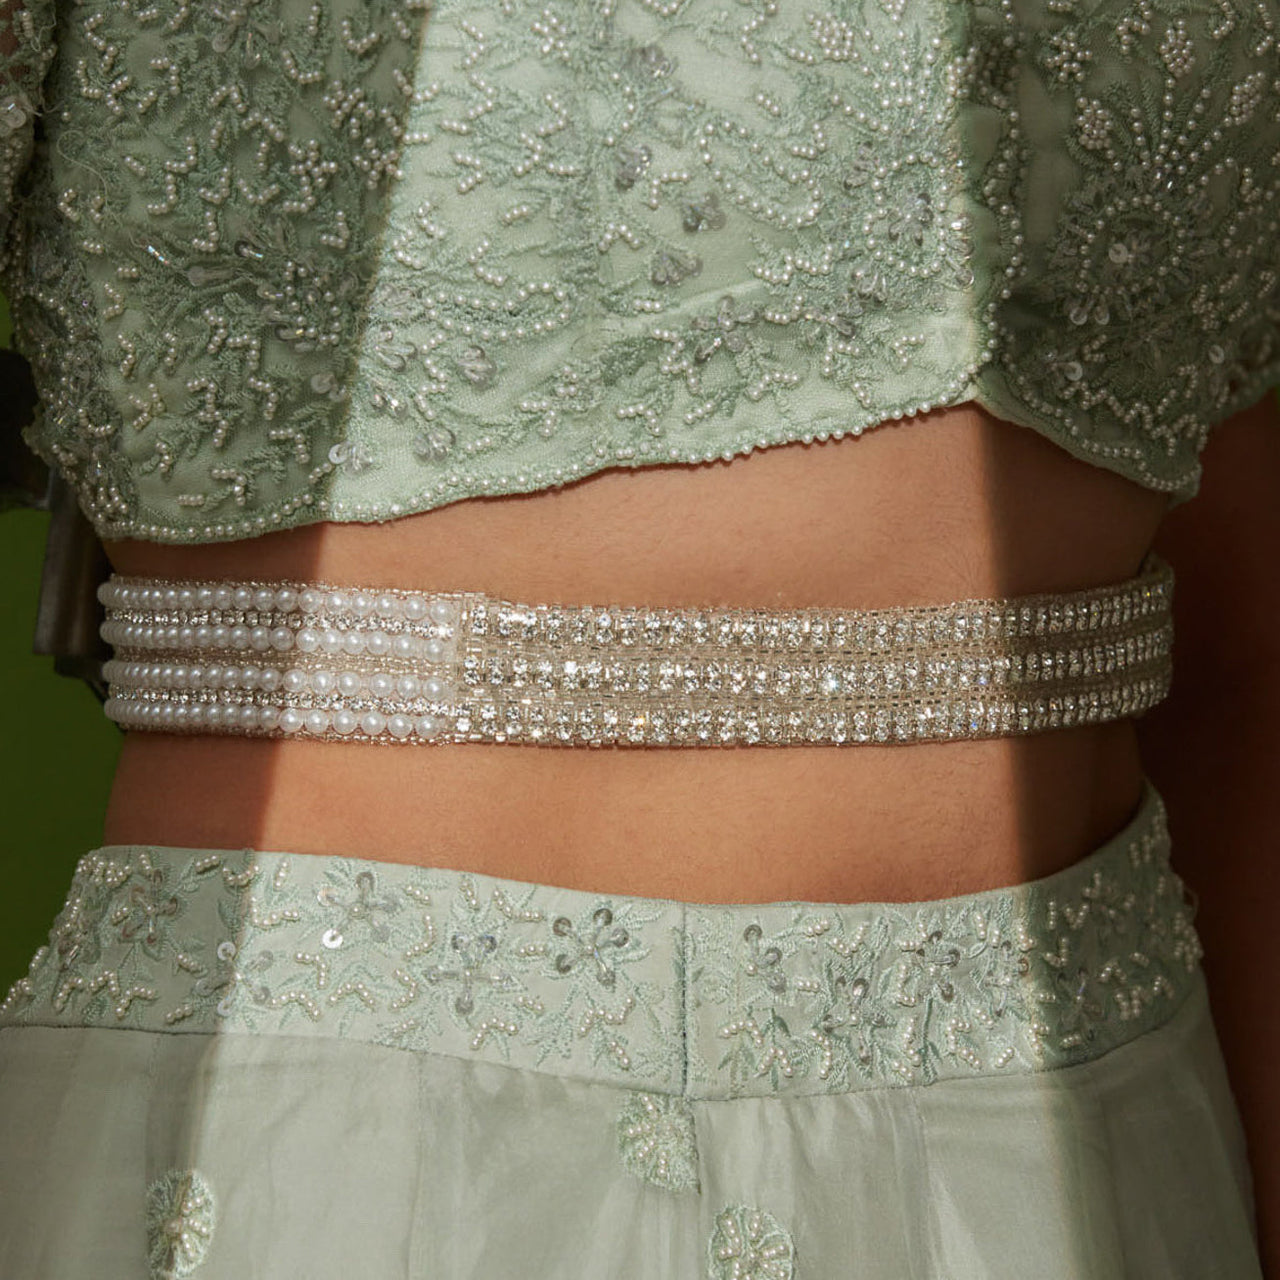 Bridal Handcrafted Silver White Lace Waist Belt 